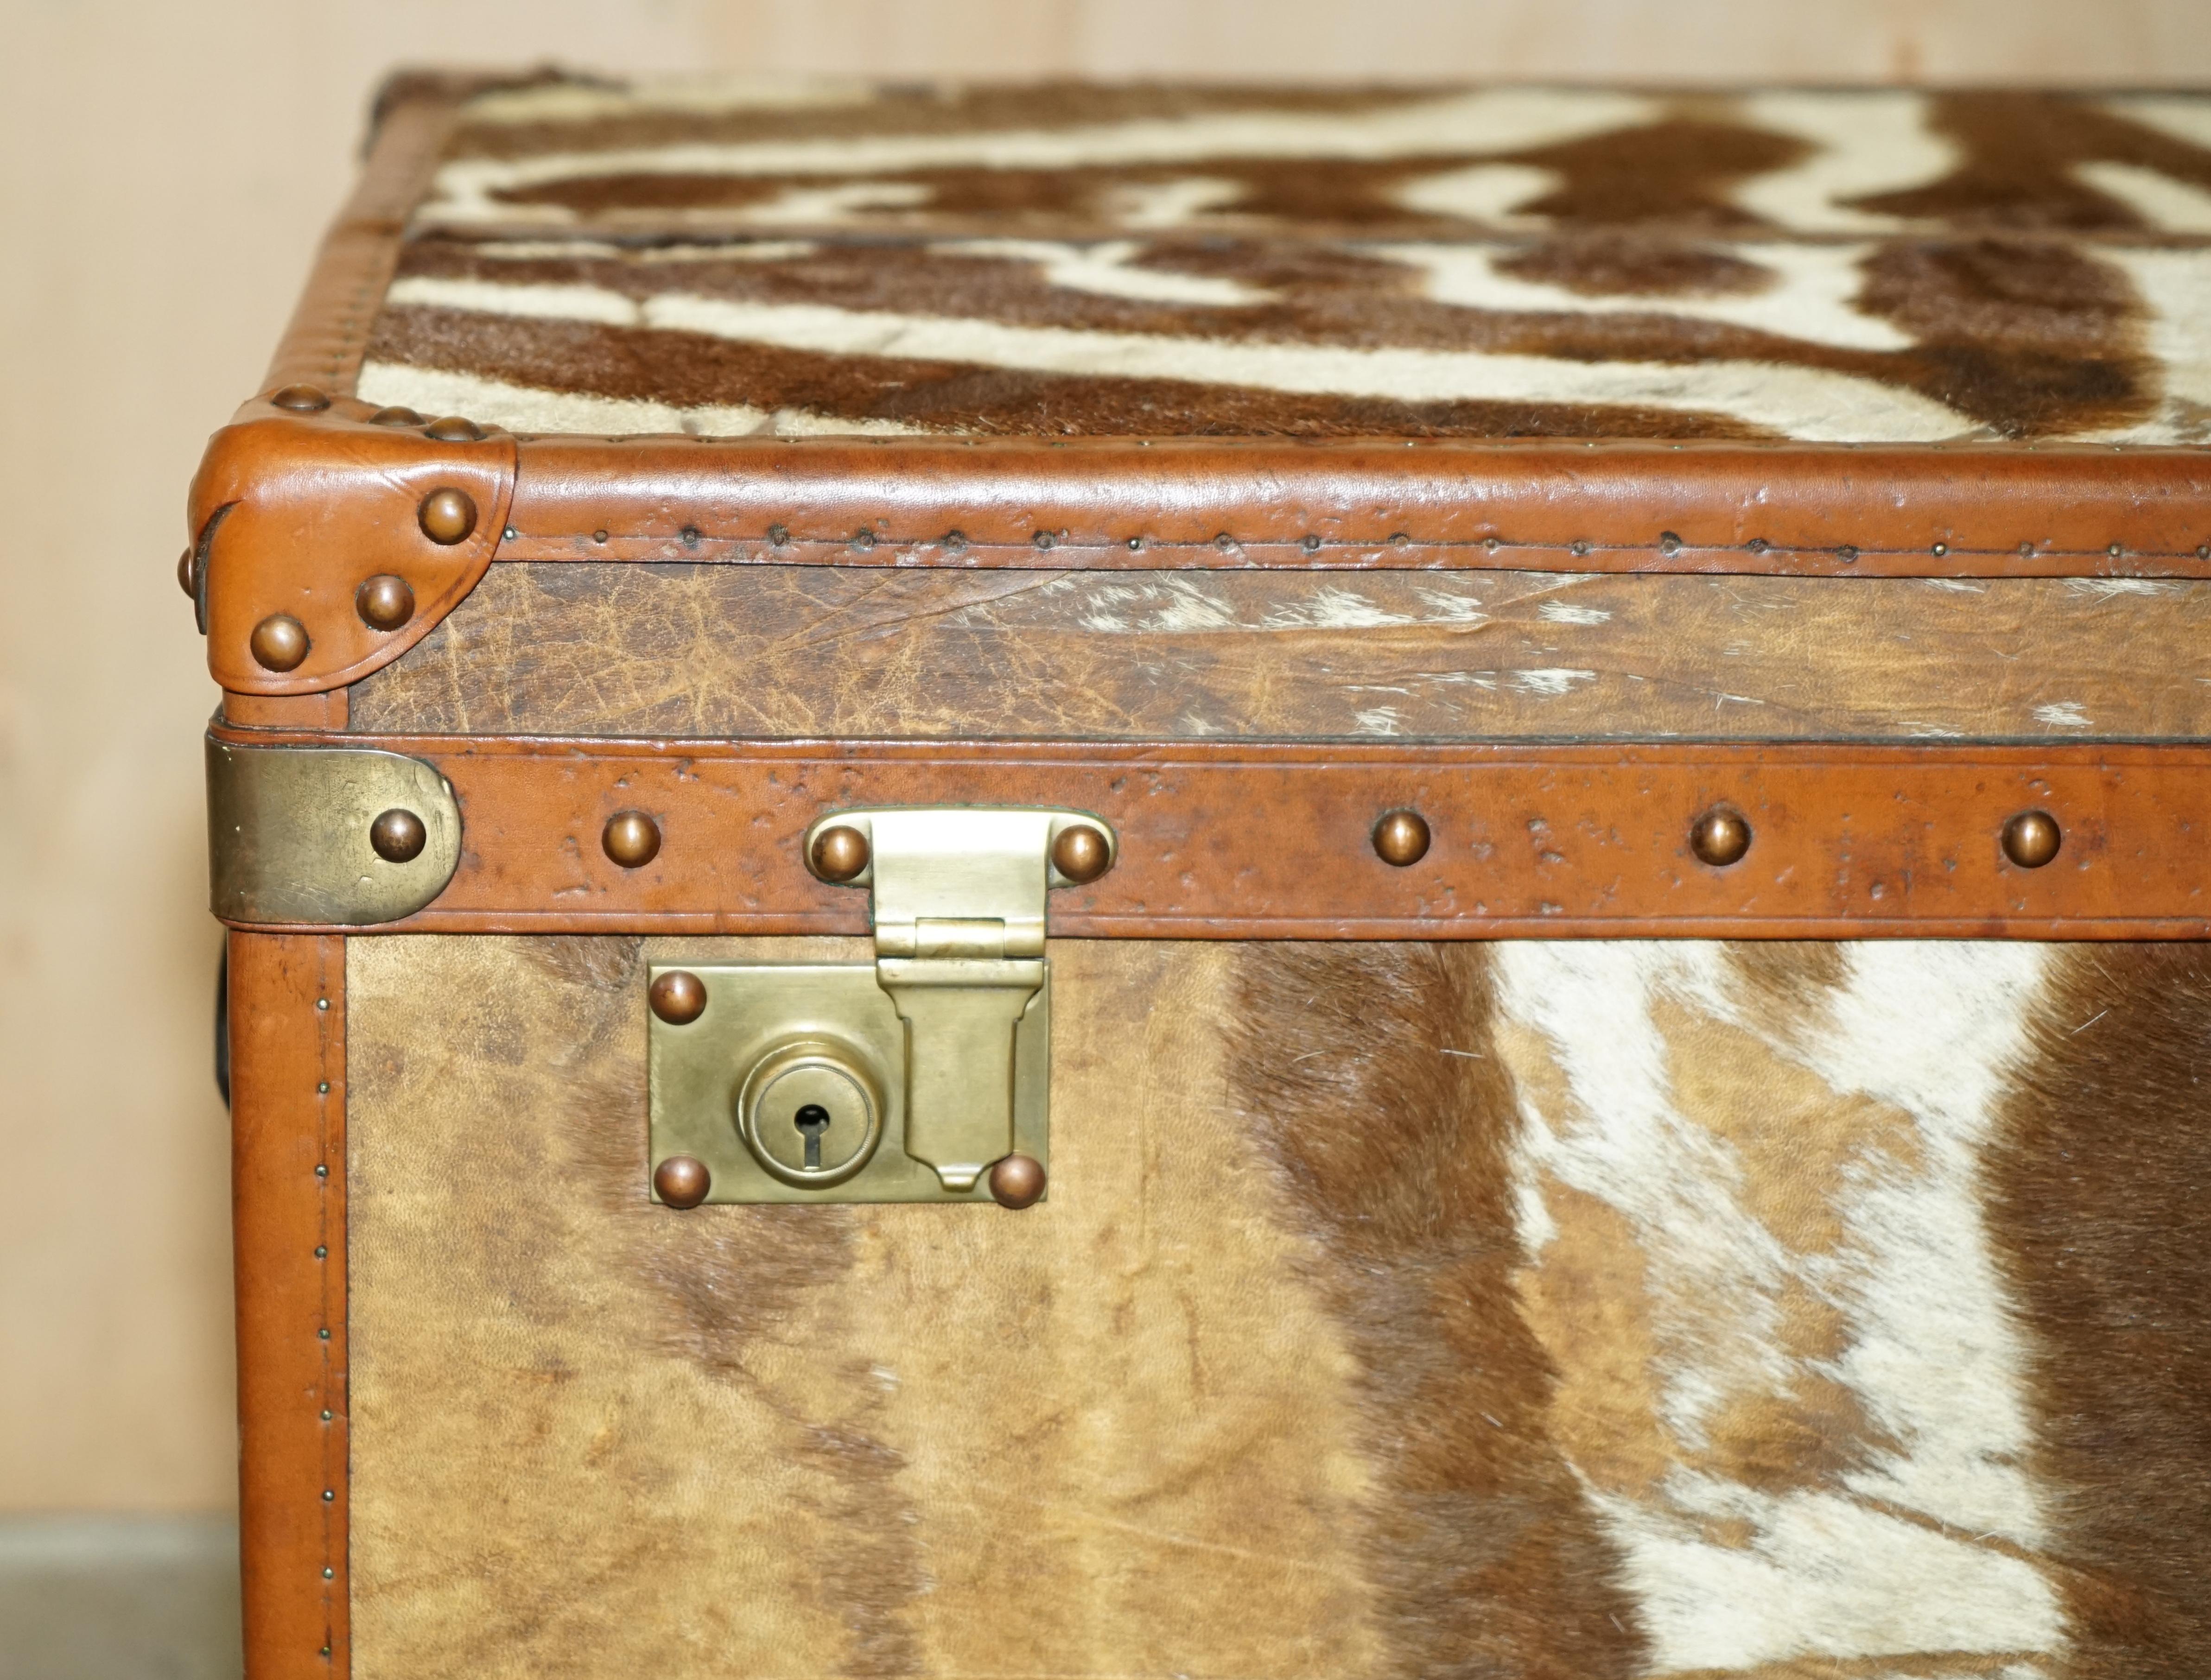 Hand-Crafted PAiR OF ANTIQUE ZEBRA SKIN & LEATHER UPHOLSTERED STEAMER TRUNKS CHESTS TABLES